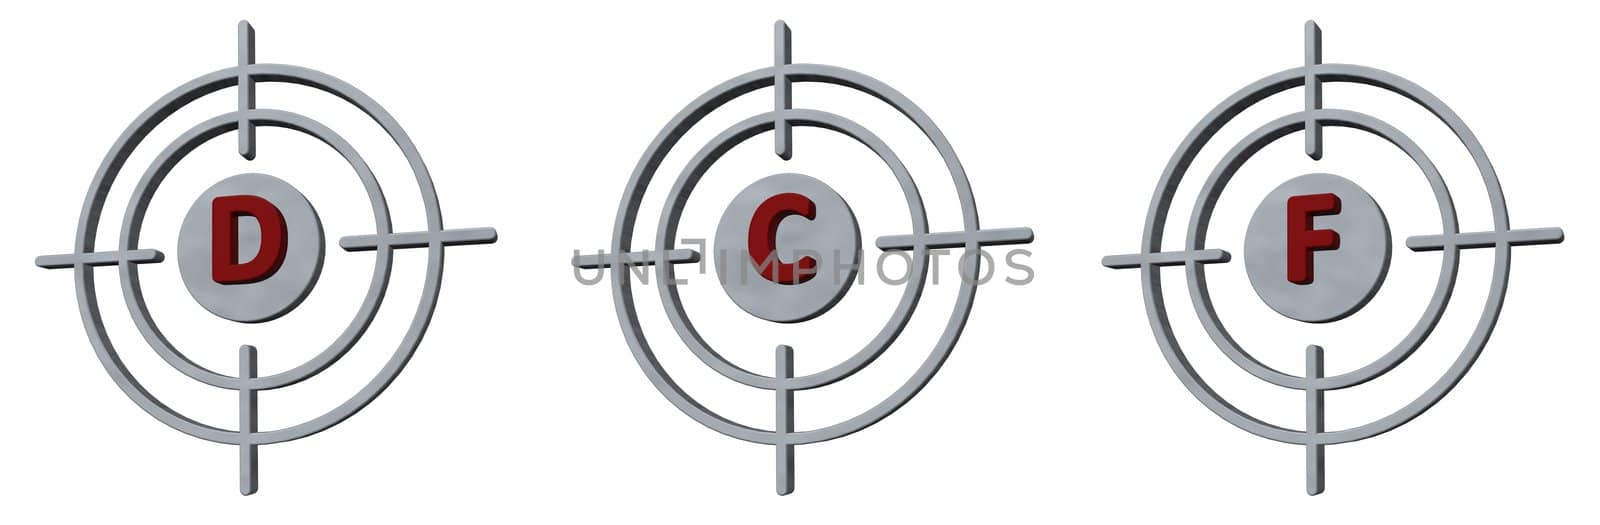 gun sights with the letters def on white background - 3d illustration